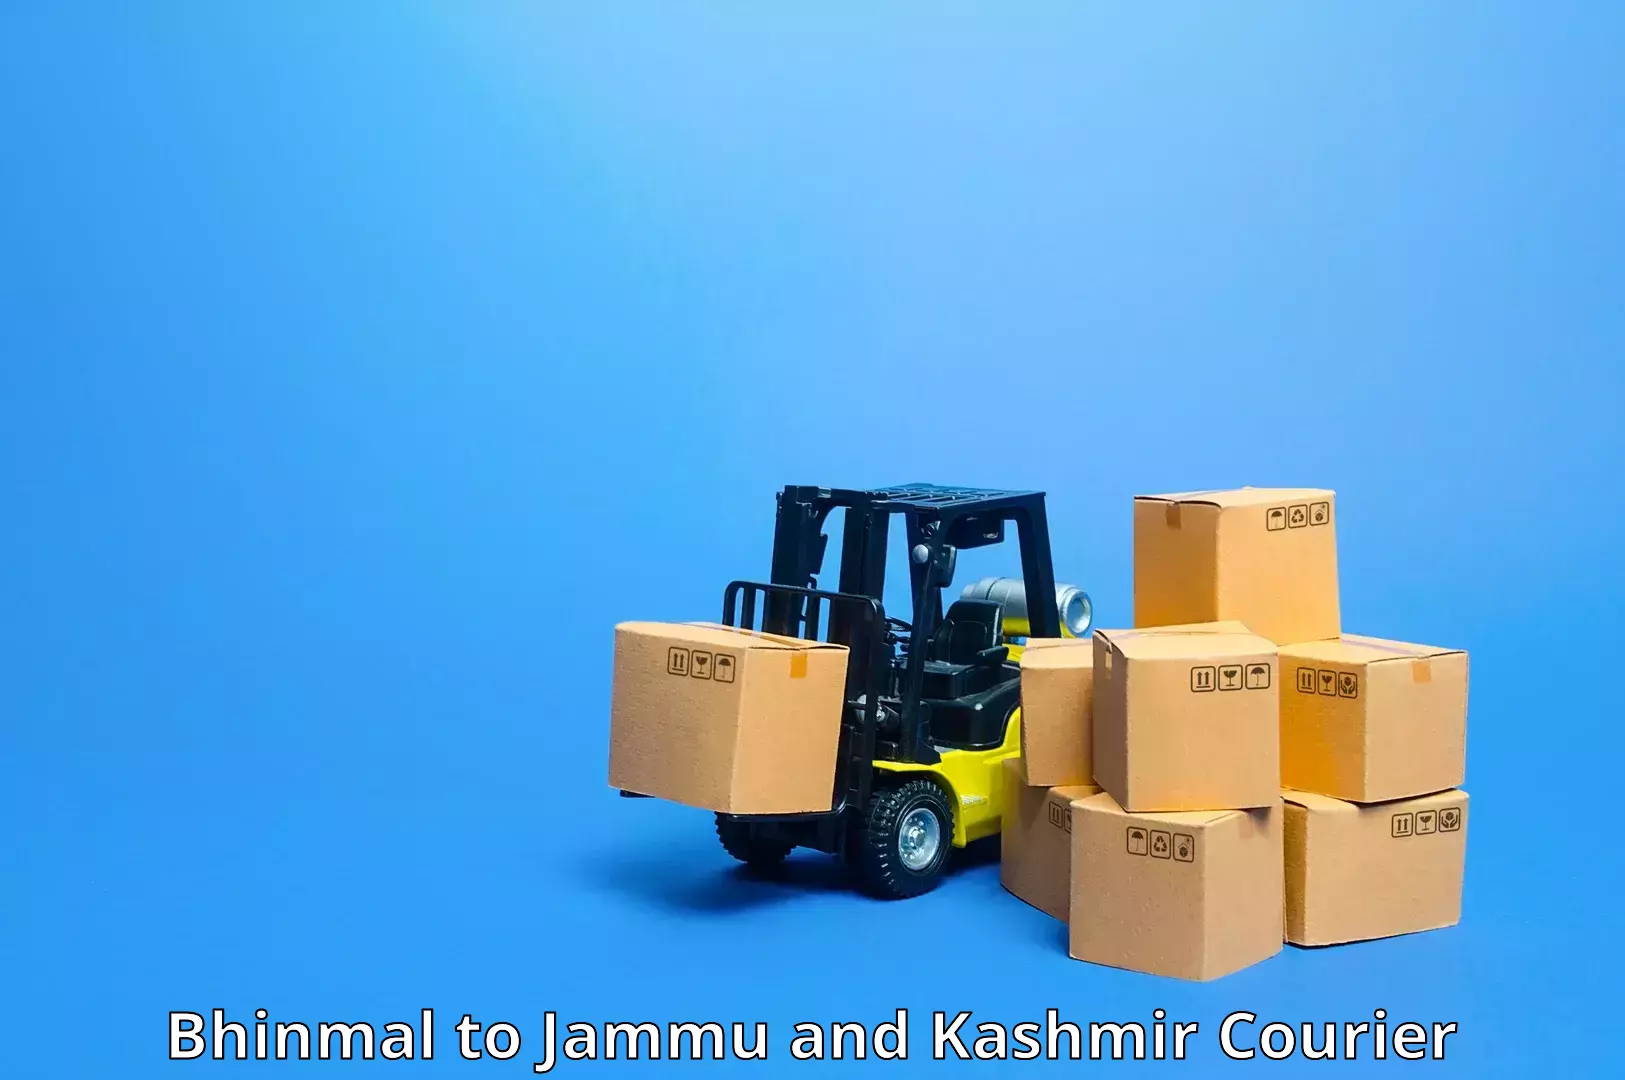 Reliable courier service Bhinmal to Anantnag